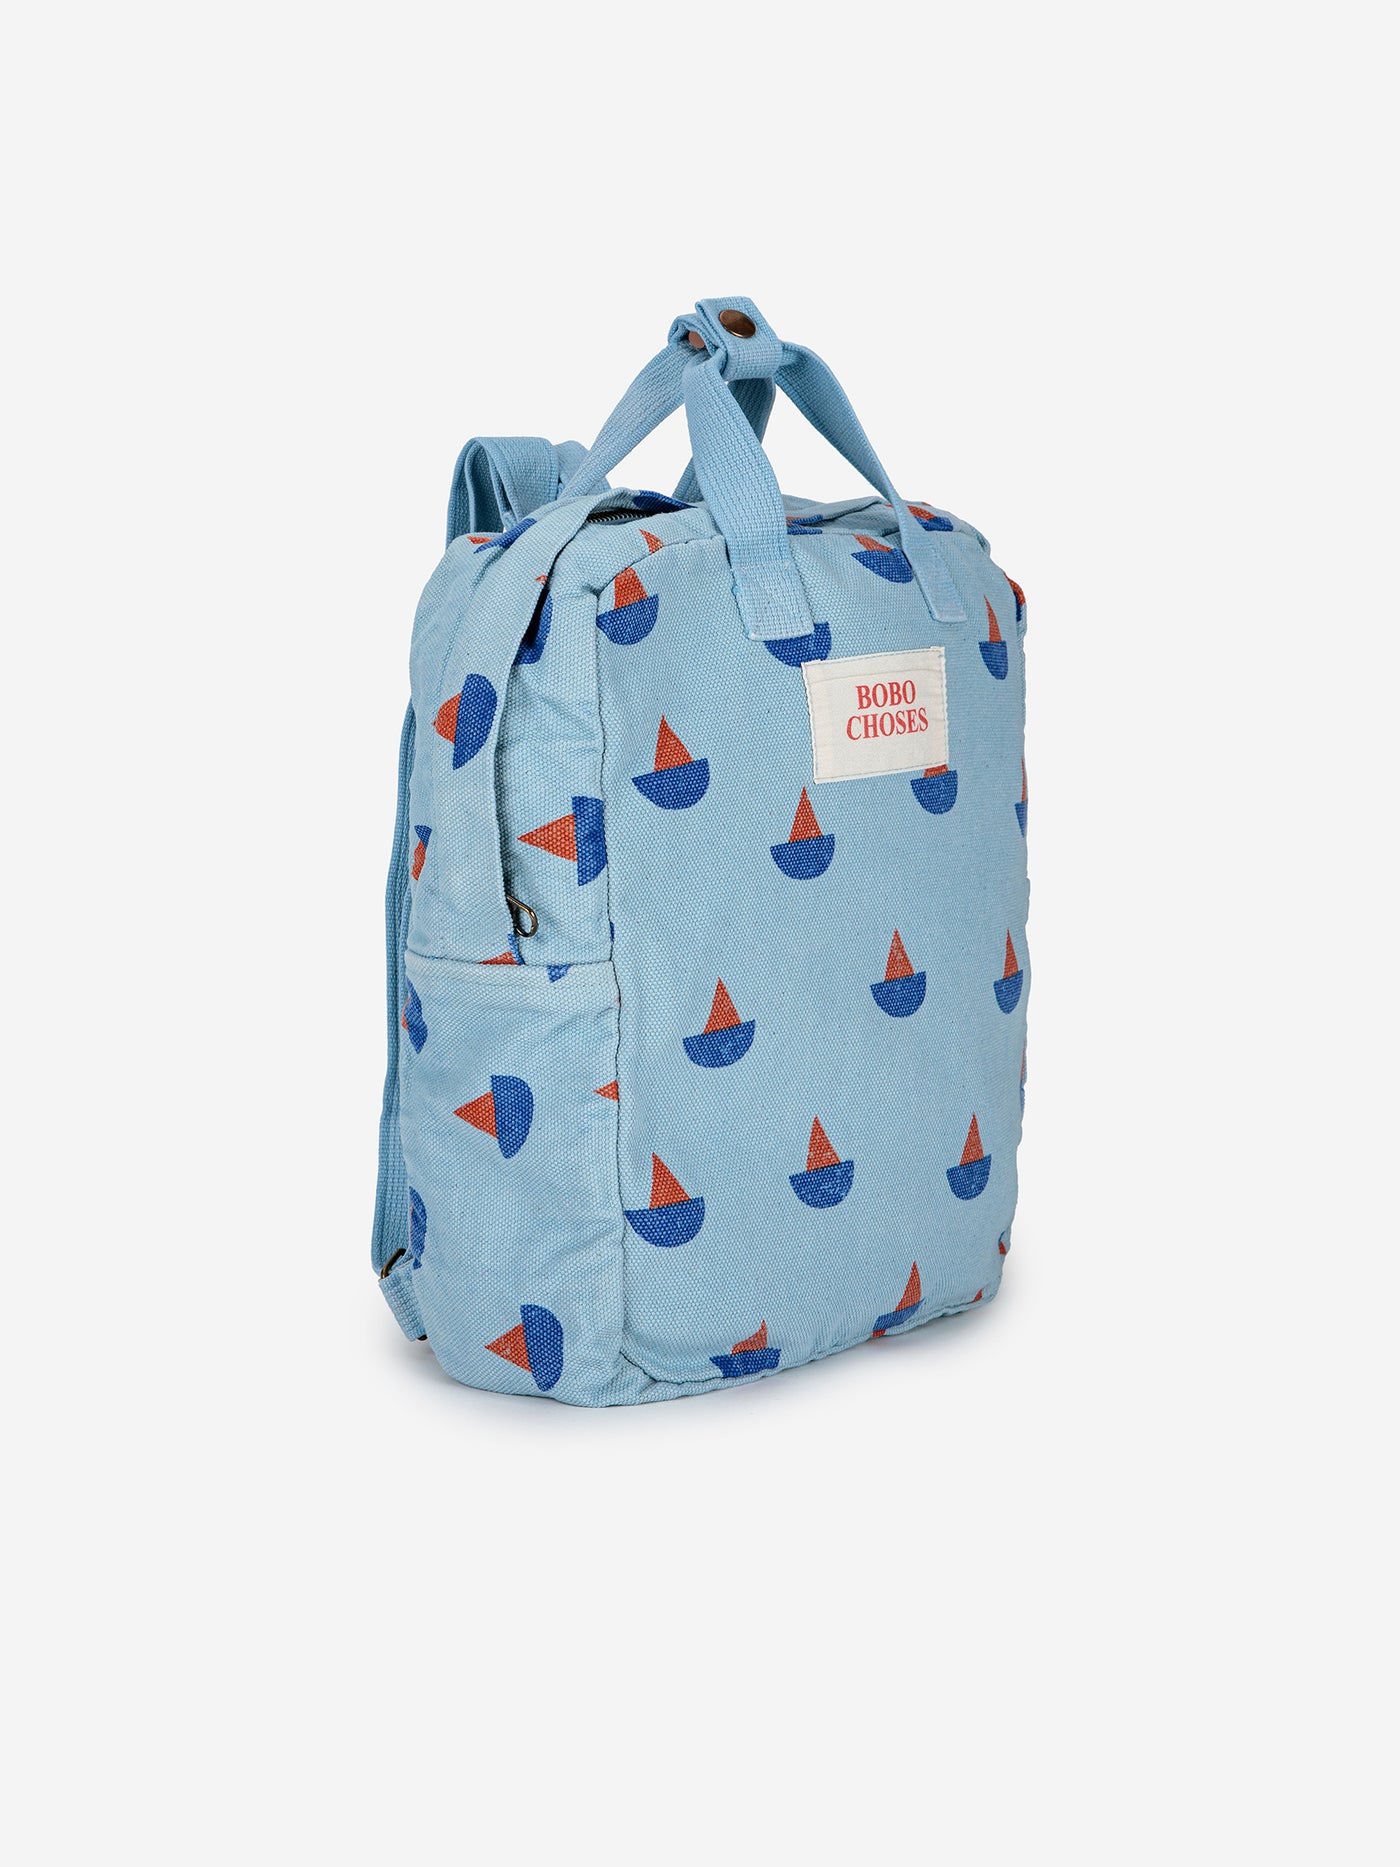 Sail Boat All Over School Bag